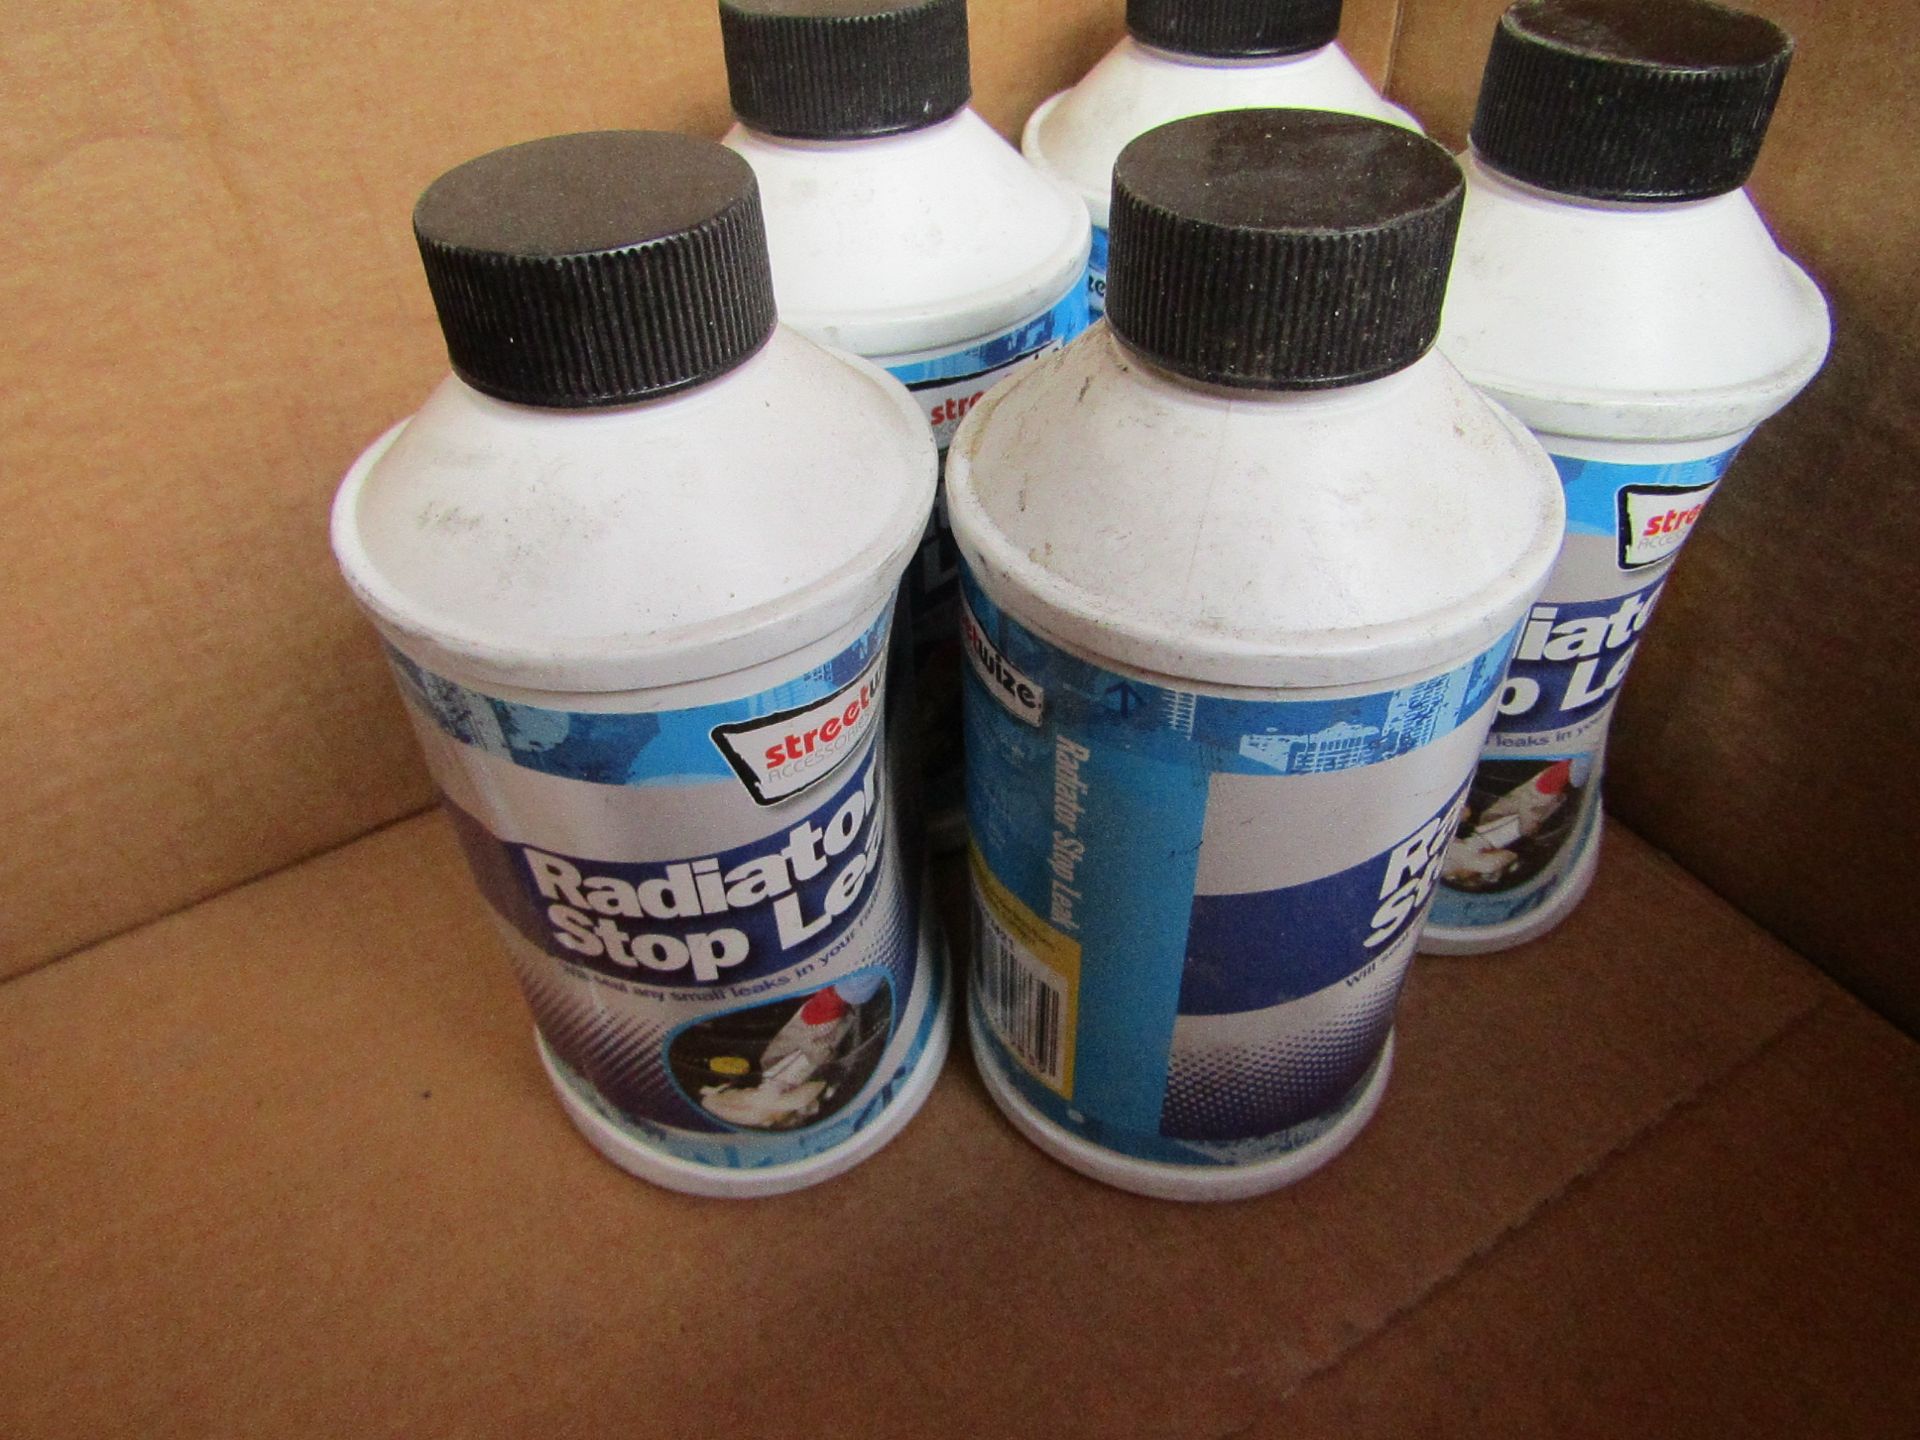 5x 325ml Bottles of streetwise Car radiator leak stop, unused but dirty from being stored.